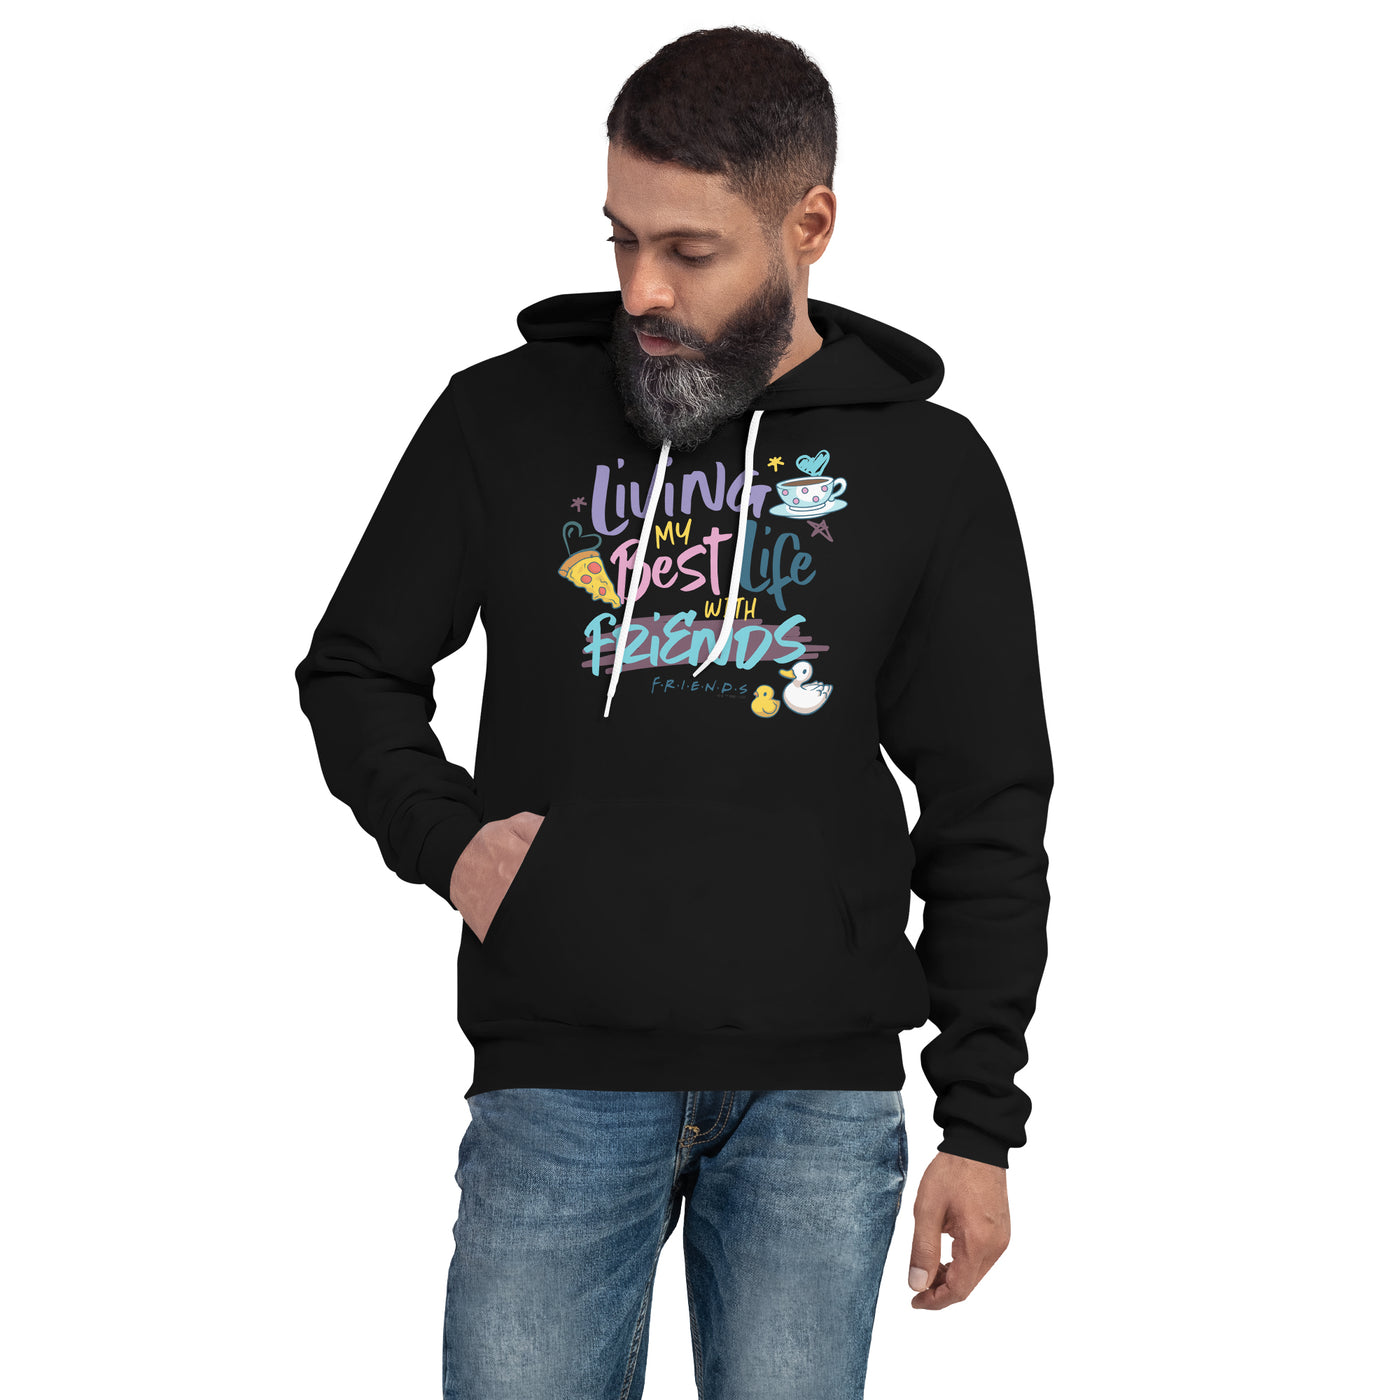 Friends Living My Best Life With Friends Hoodie